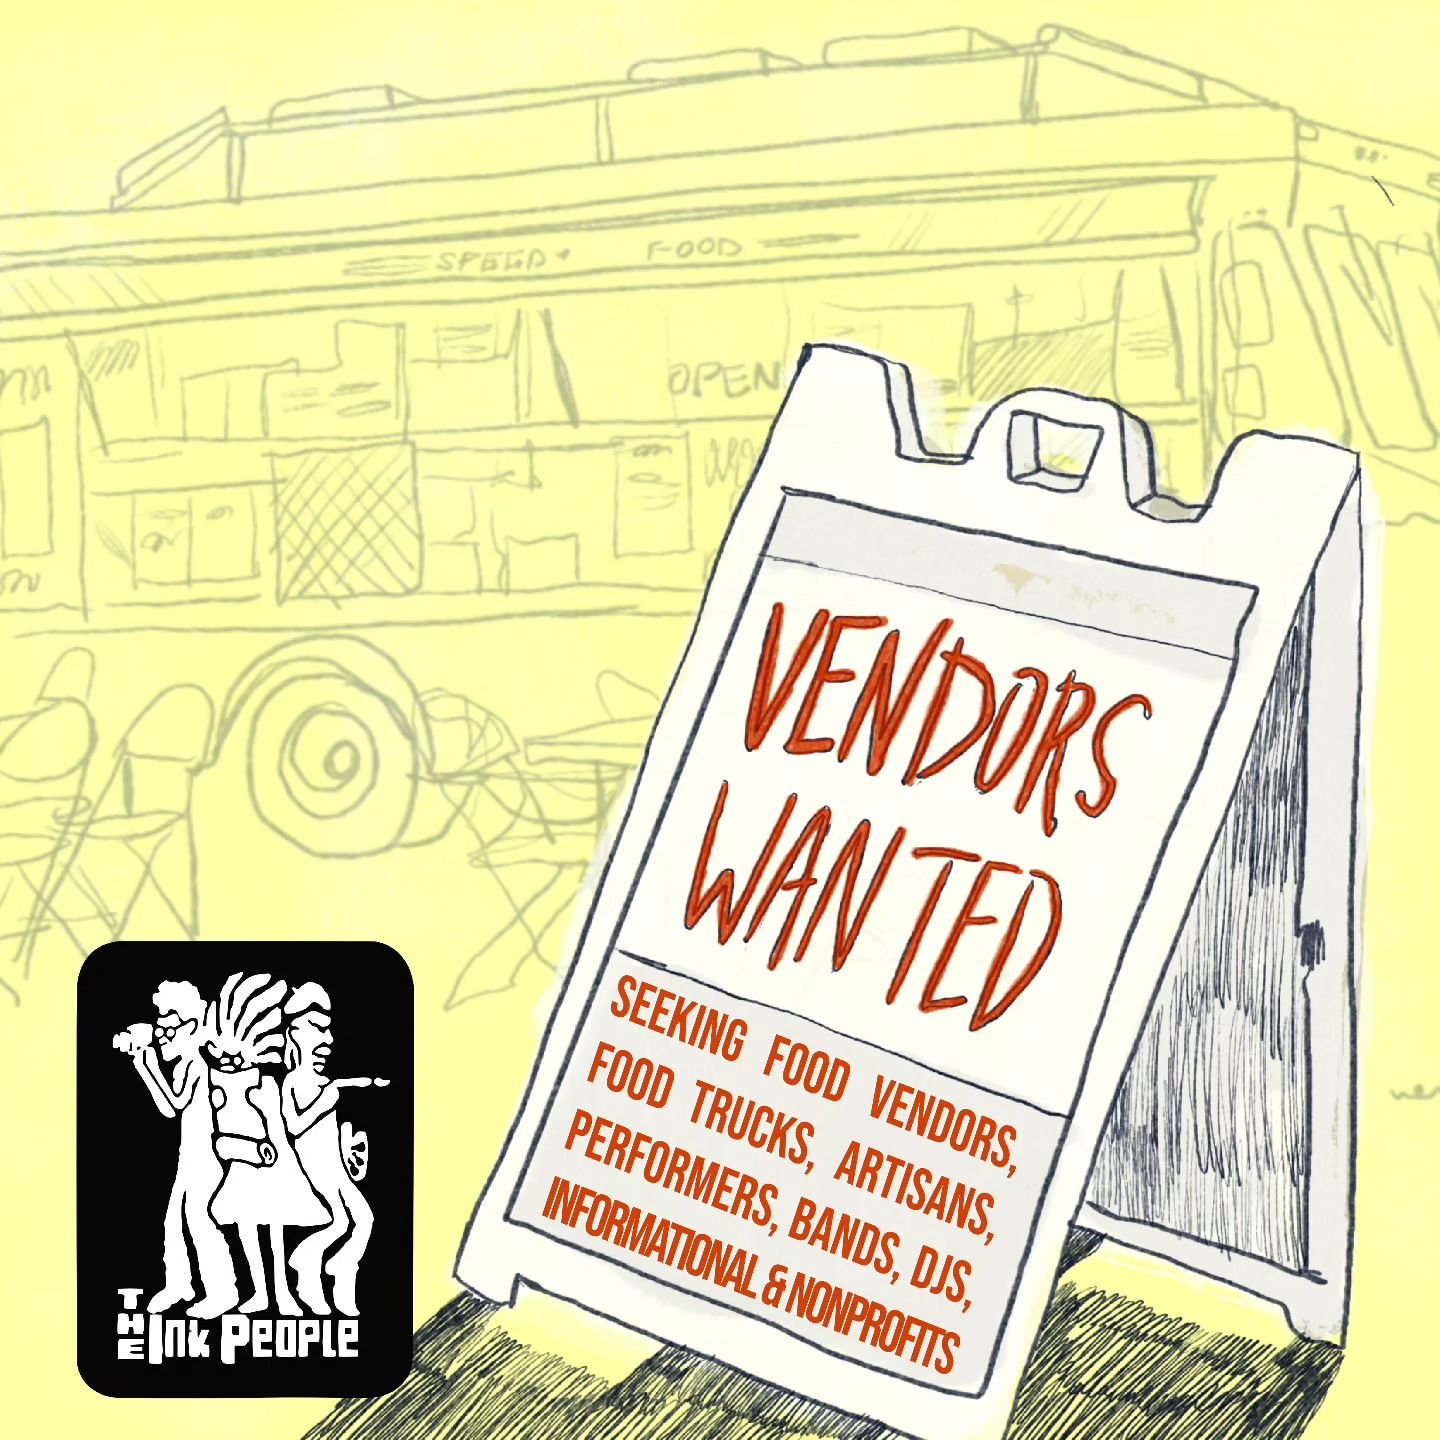 We are seeking vendors! We are creating a list of vendors that we can pull from when we have events. Are you a food vendor, artisan, performer, band, DJ, educator or nonprofit? 

Fill out our application that can be found in our bio, website or this 